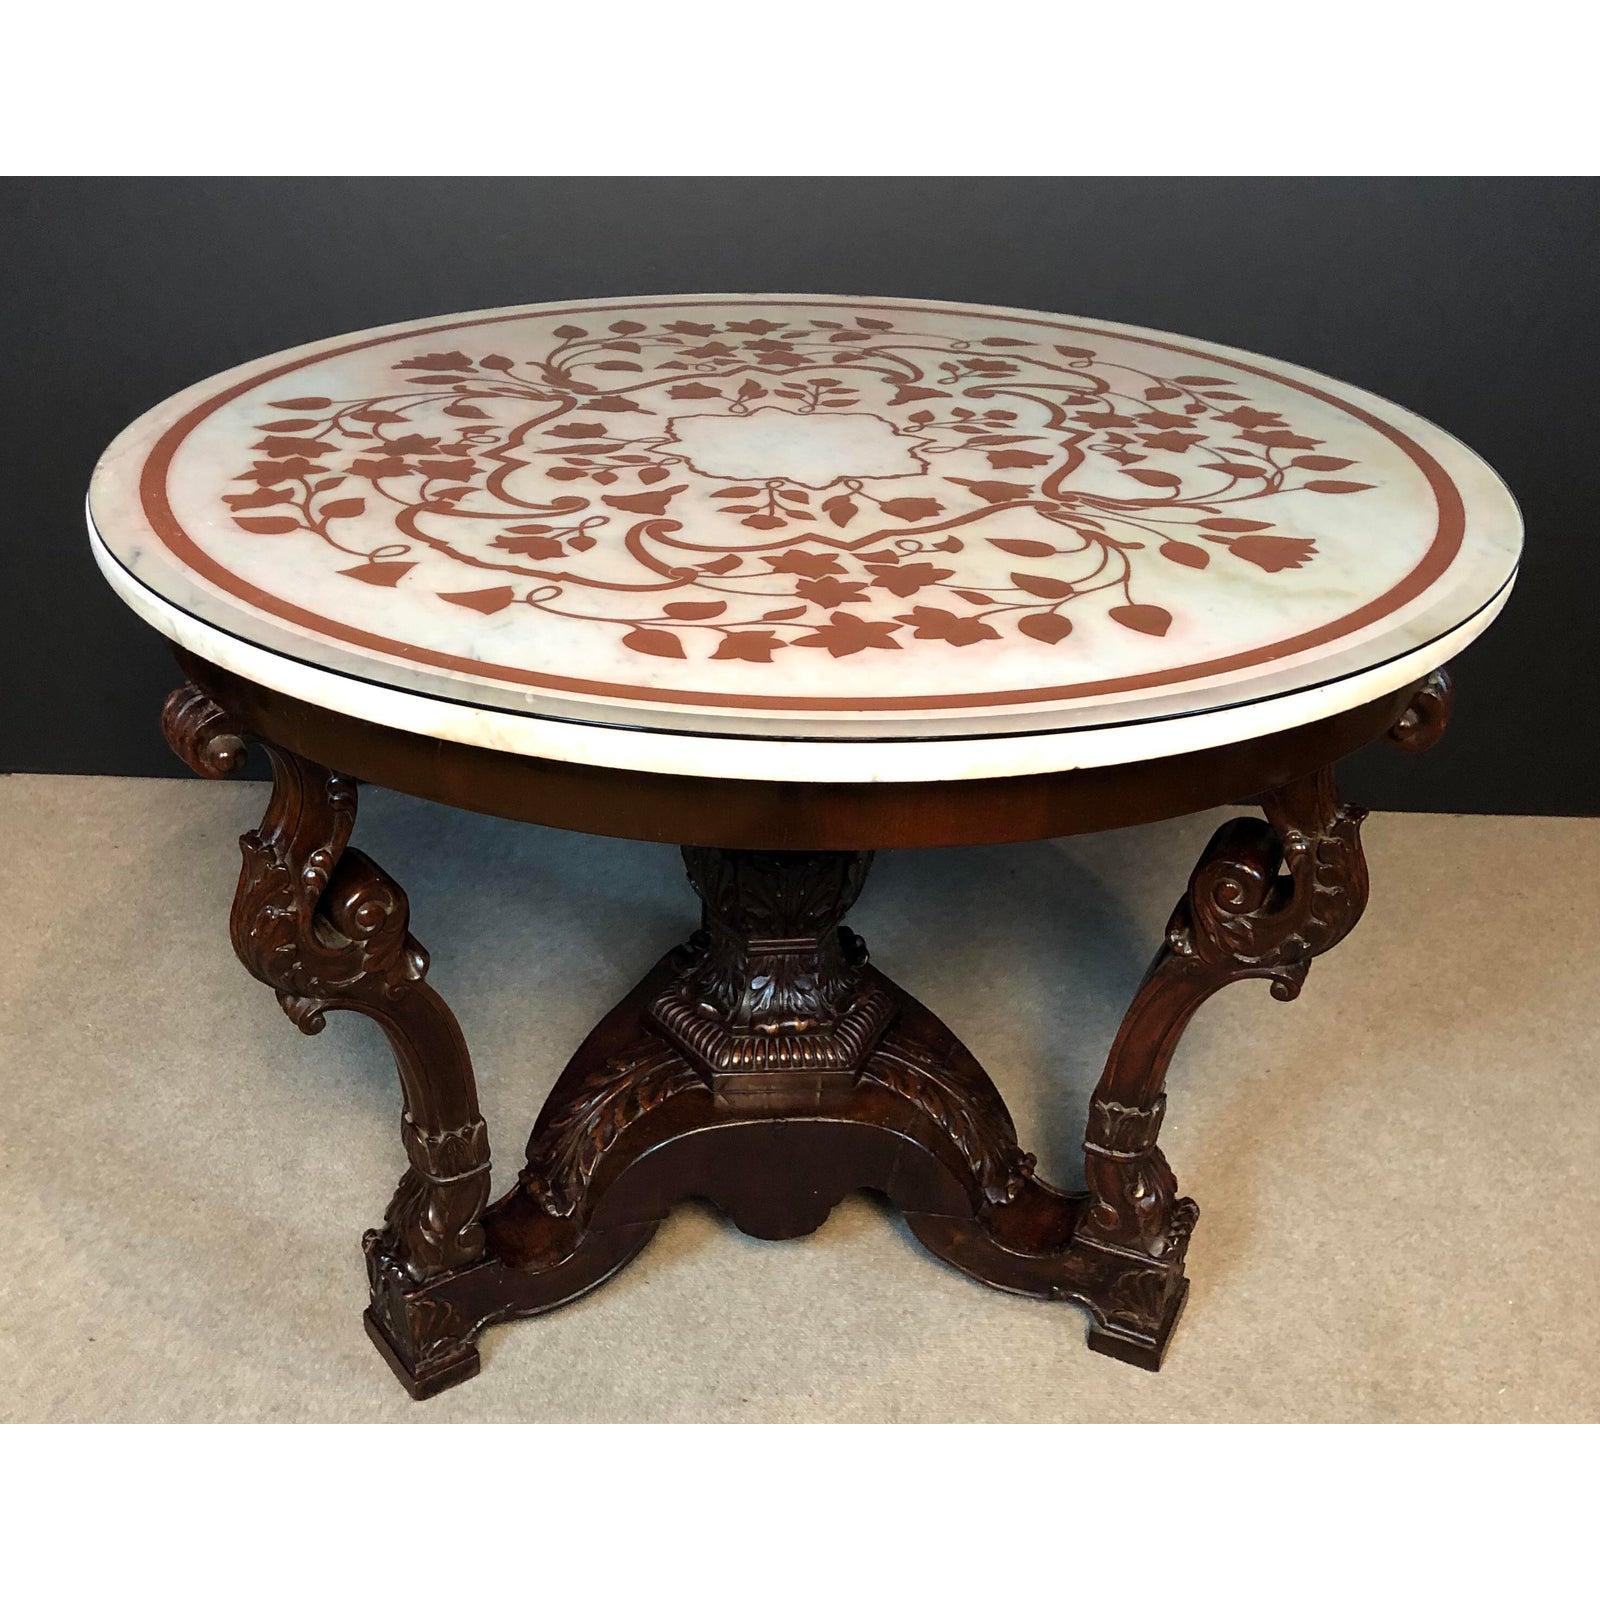 Italian Scagliola white marble-top carved wood center table. Made in the mid-19th century. High style with a Baroque influence.

 